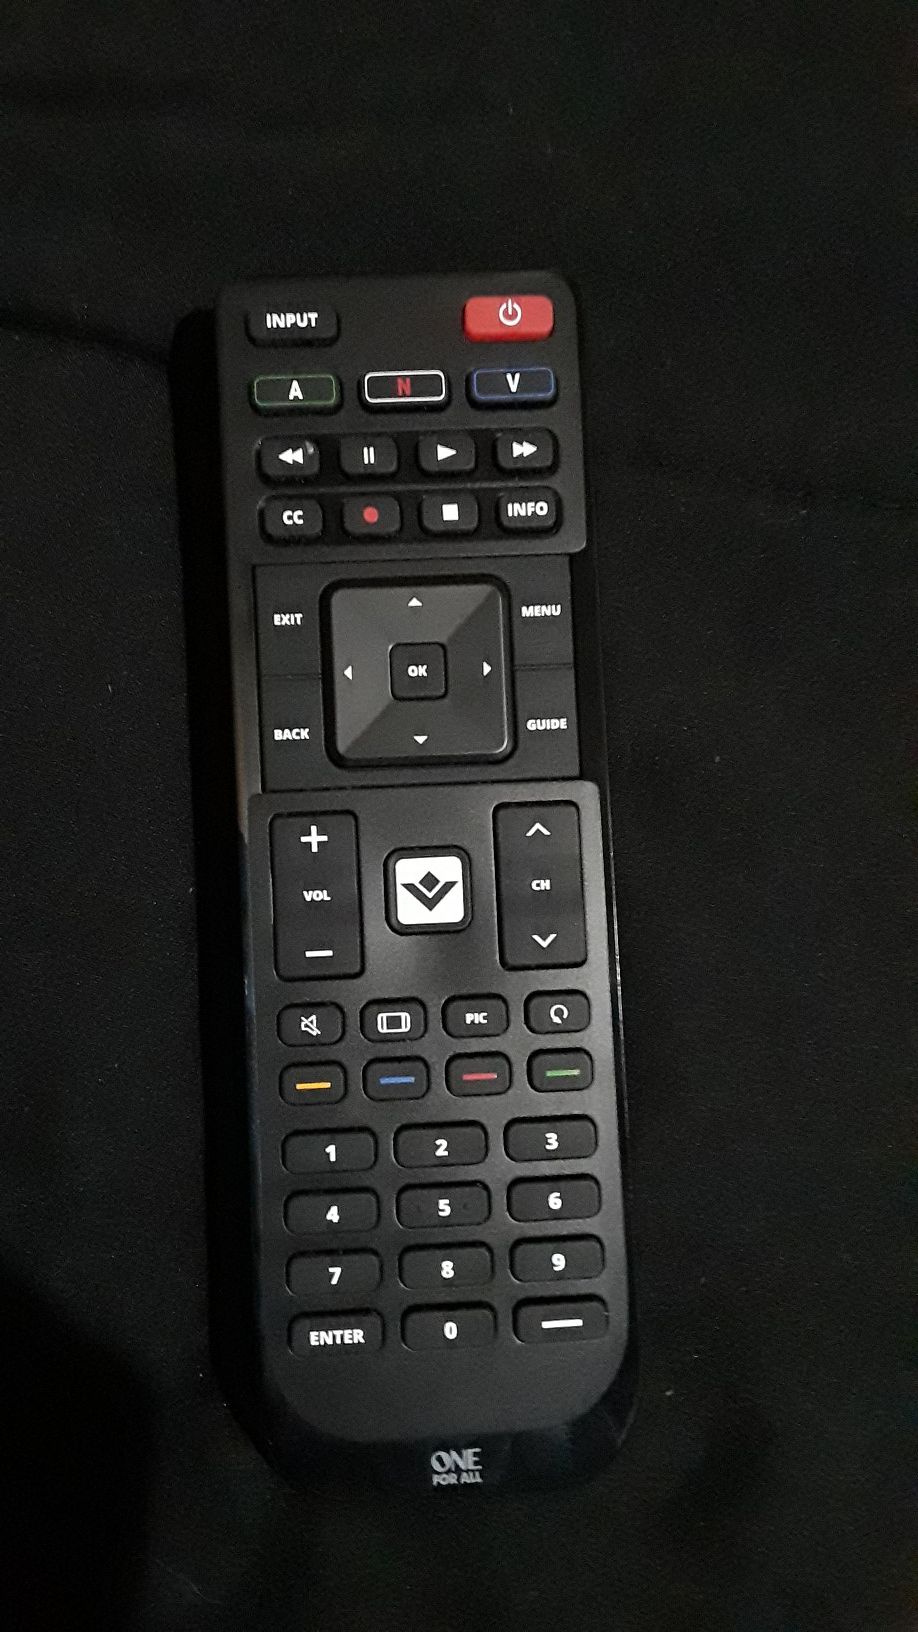 Brand new universal remote control for Vizio TVs only